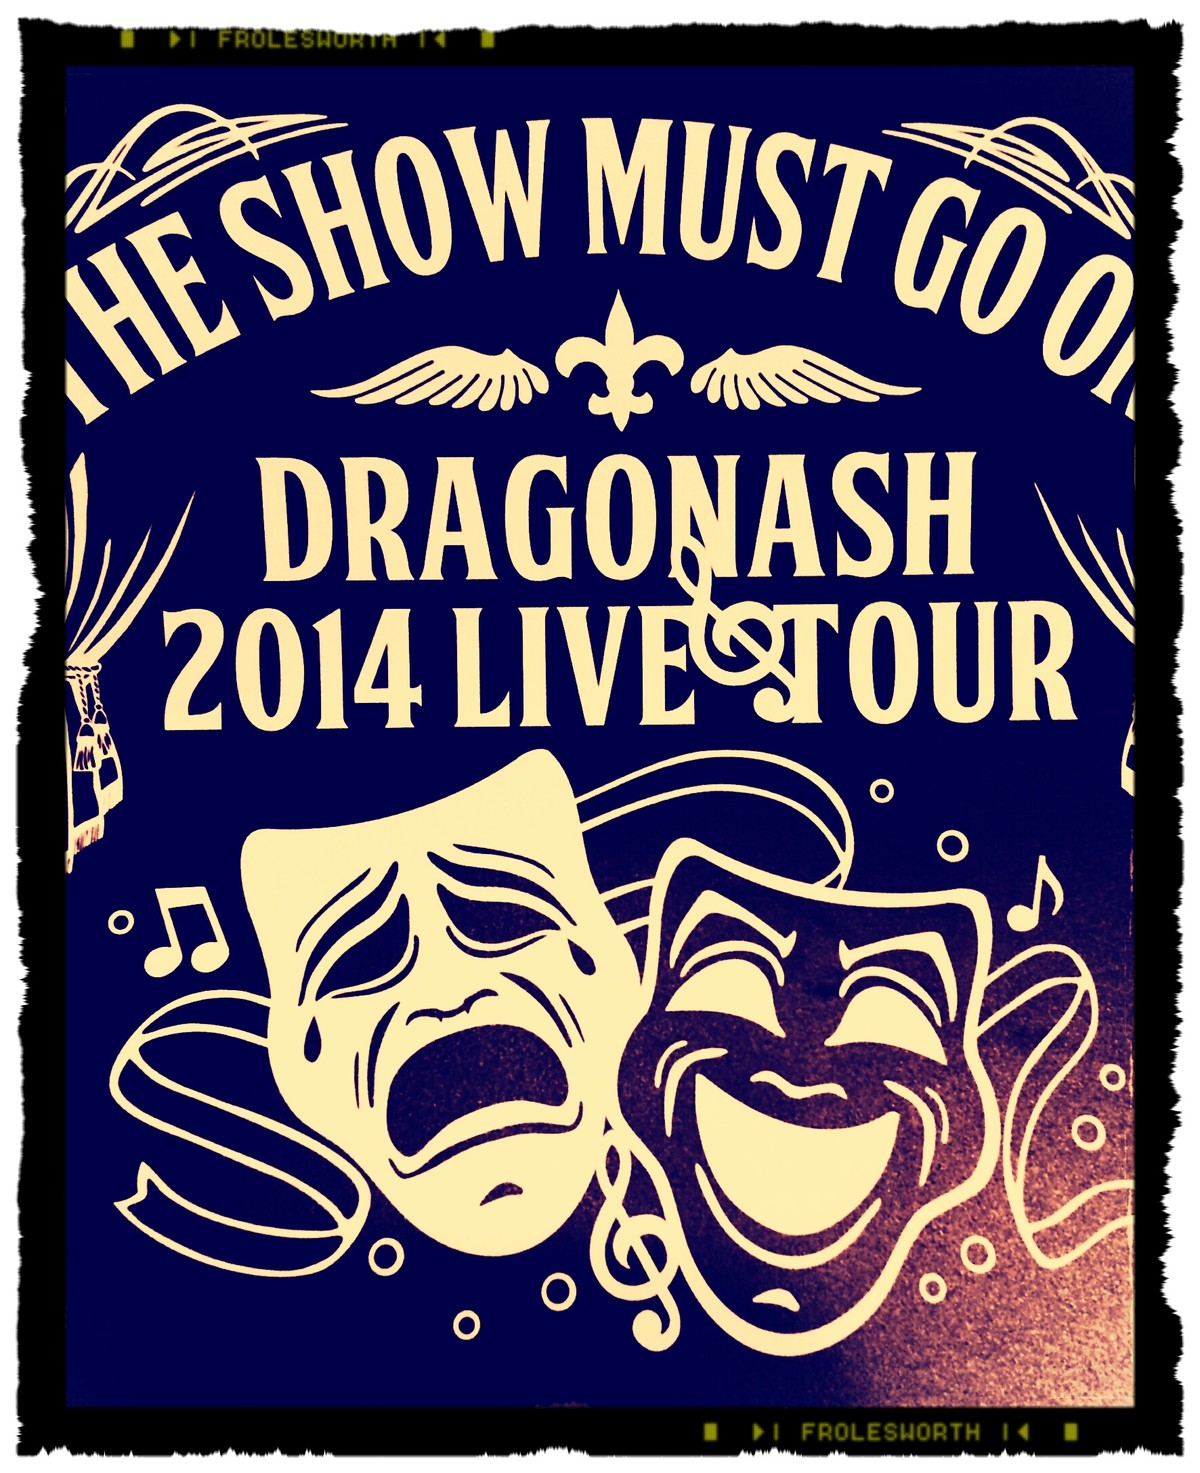 Dragon Ash Tour The Show Must Go On At Oita T O P S Bitts Hall Nave クボタヨシフミ ラジバカ